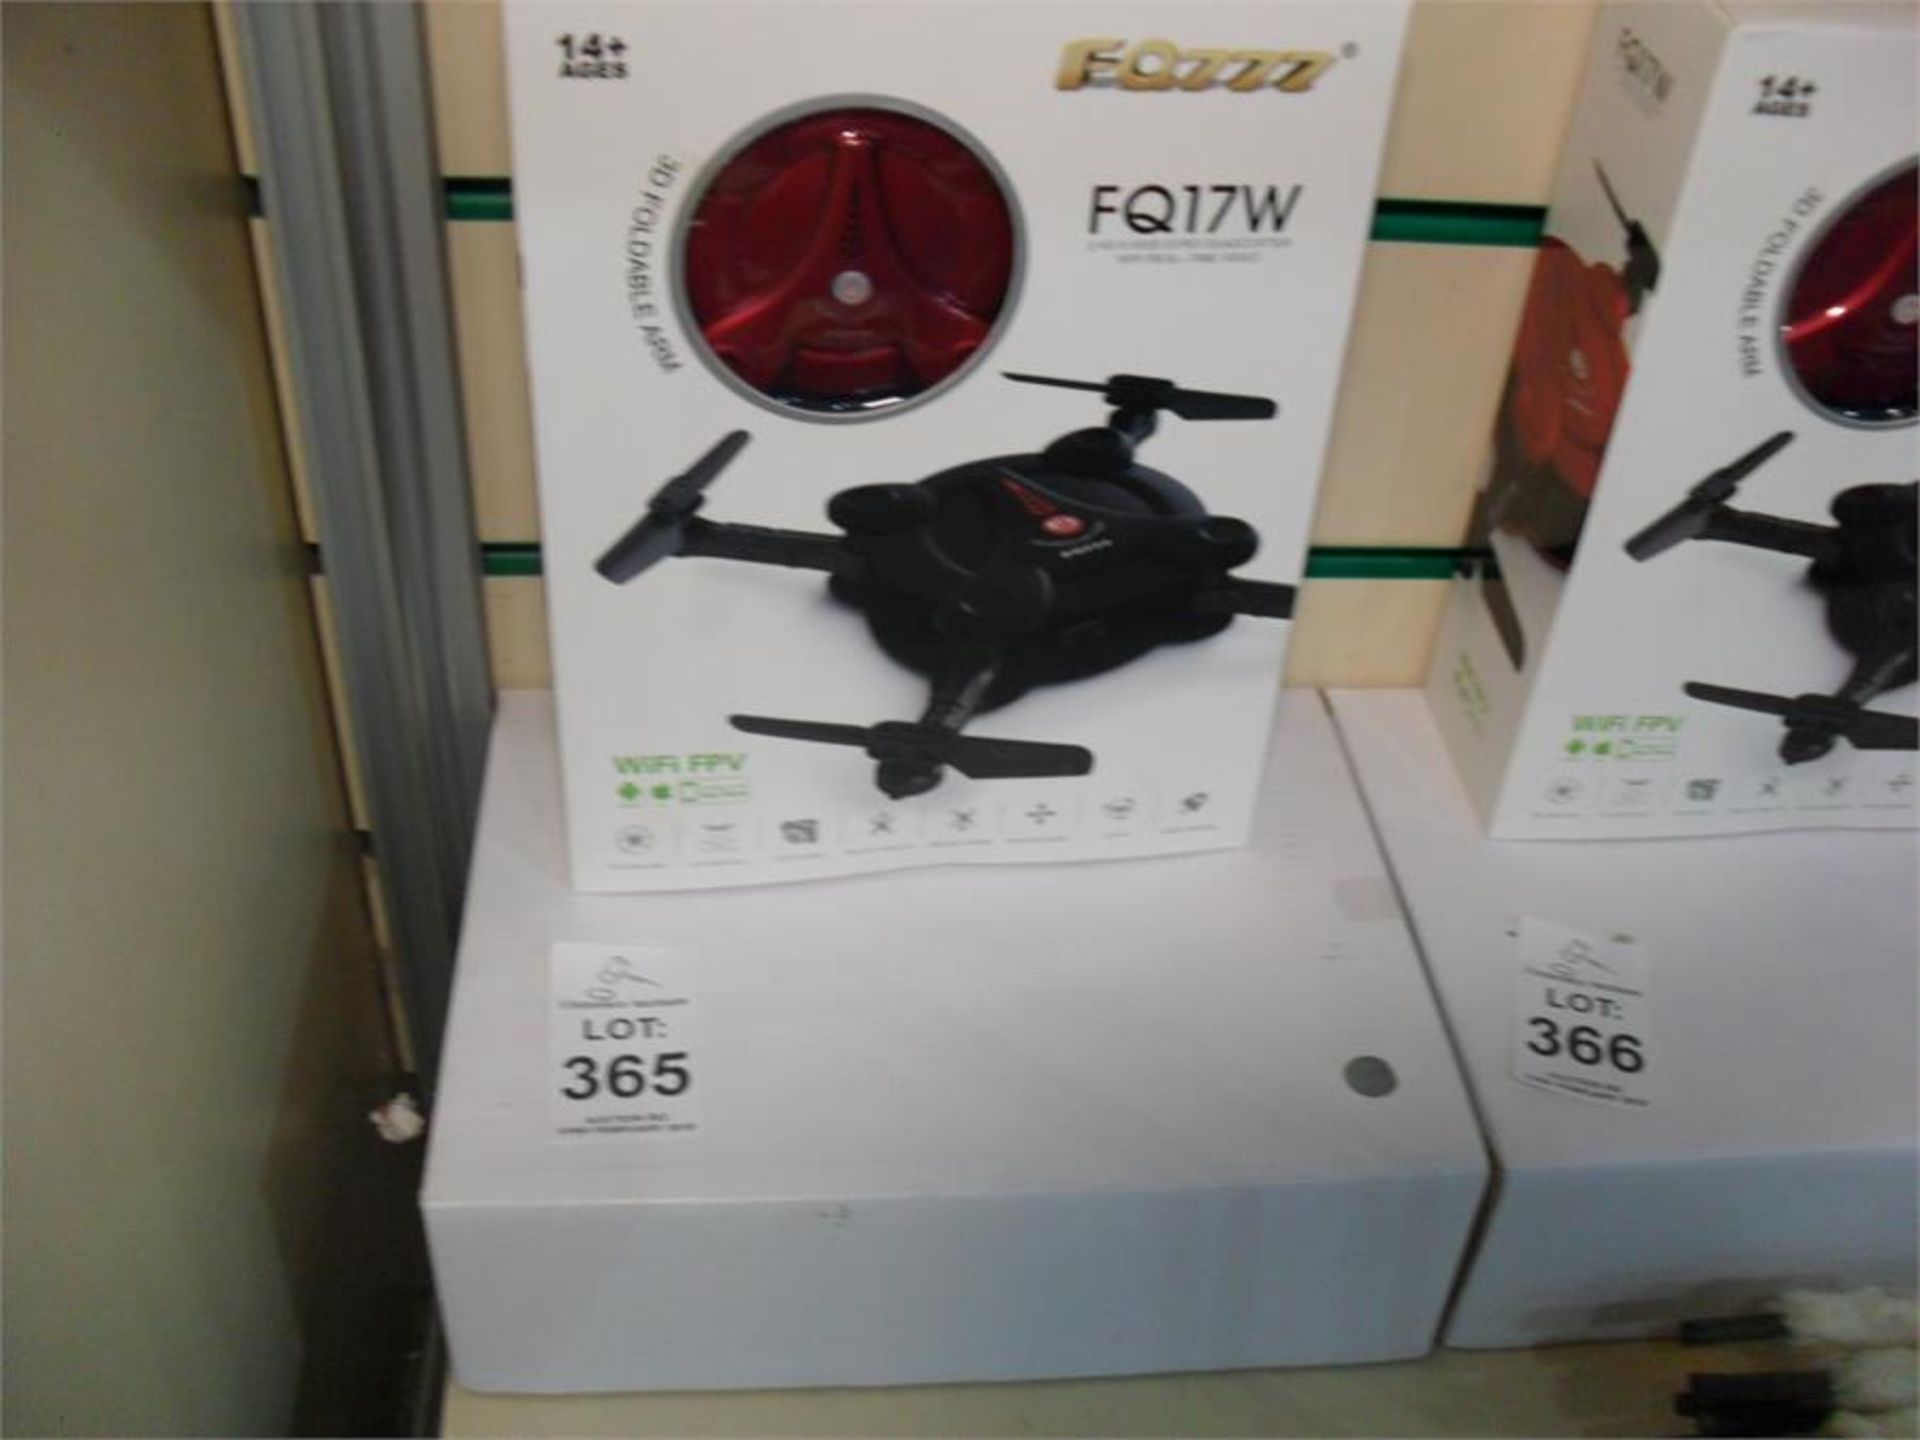 NEW FQ777 RED DRONE BUILT IN WIFI AND RECORD WATCH LIVE FOOTAGE FROM YOUR PHONE